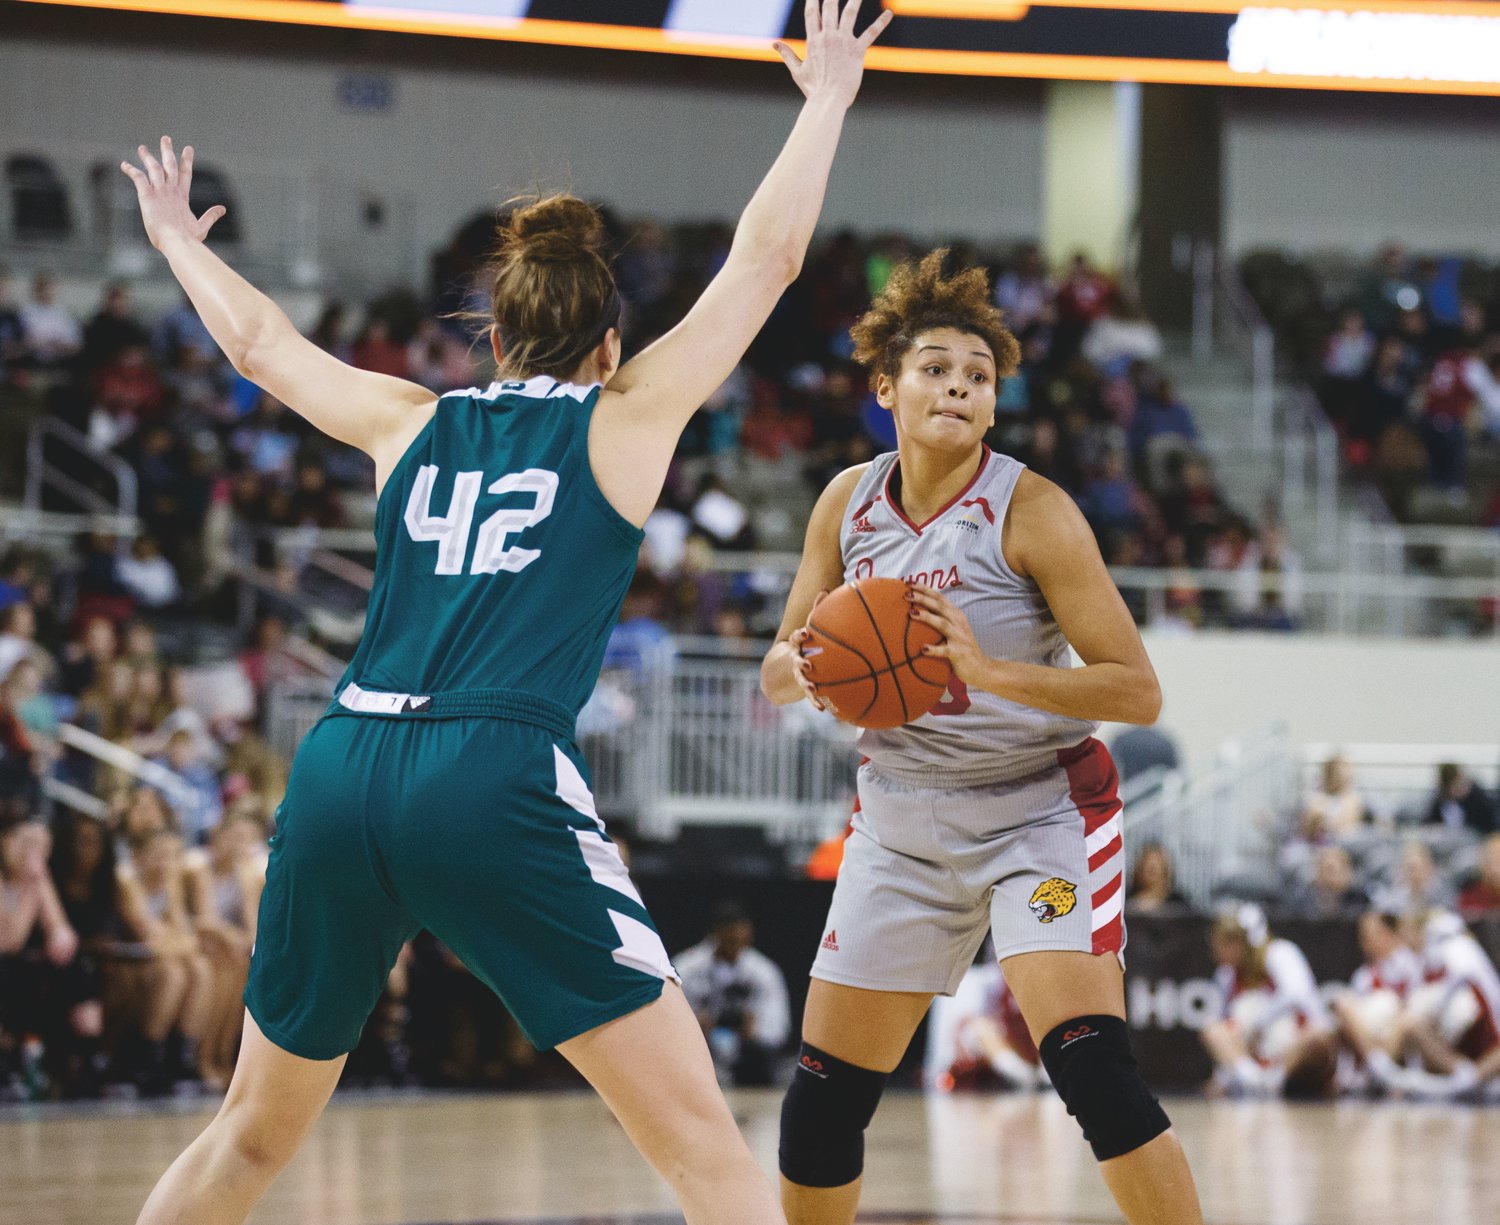 IUPUI's Macee Williams helped lead the Jags past Green Bay 51-37 to the Horizon League Championship and their first NCAA tournament appearance.